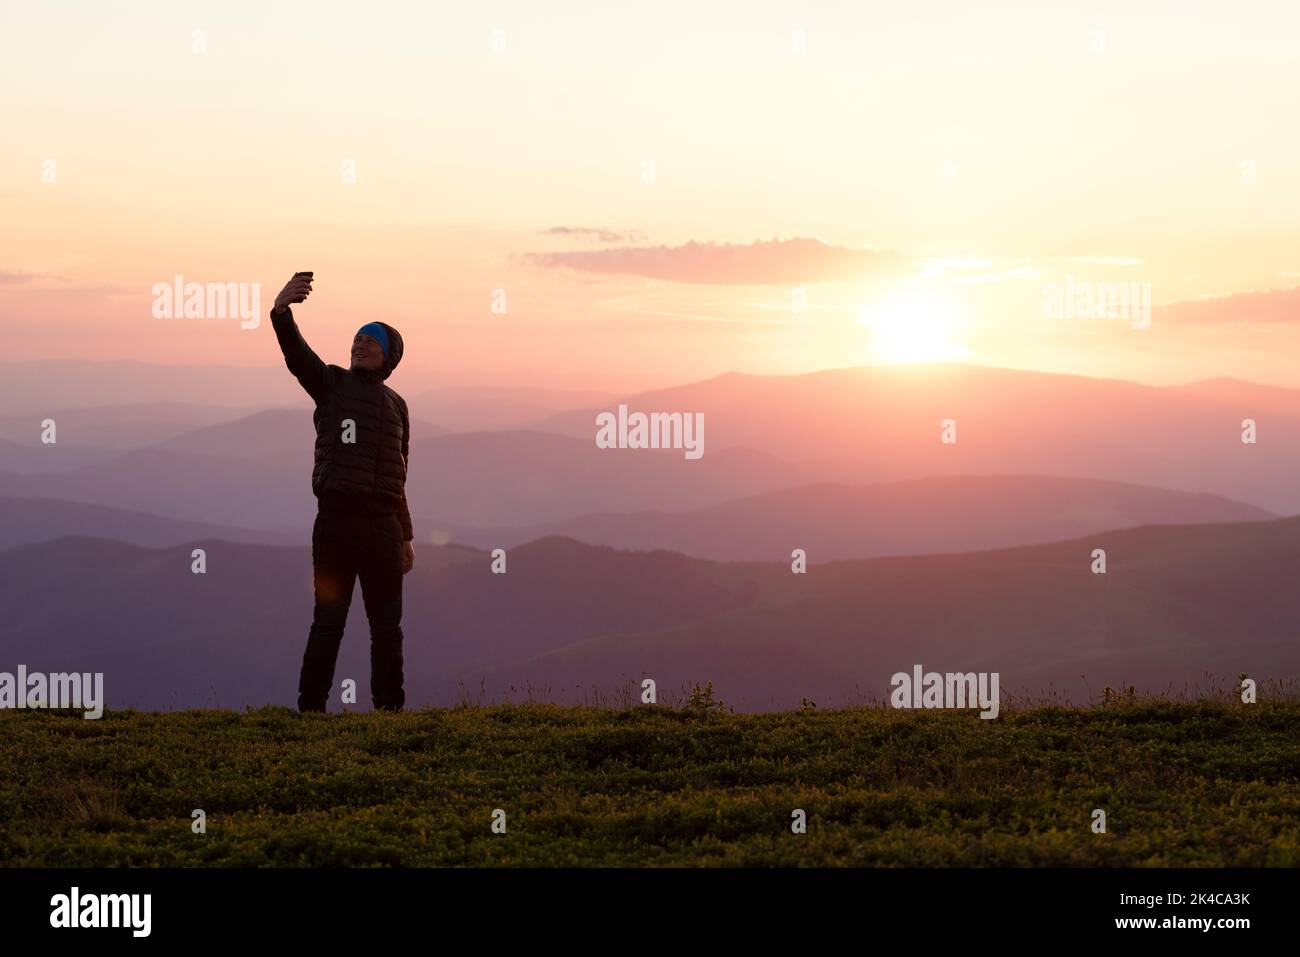 Tourist stands on top of a mountain taking a selfie in the colorful background at sunset Stock Photo